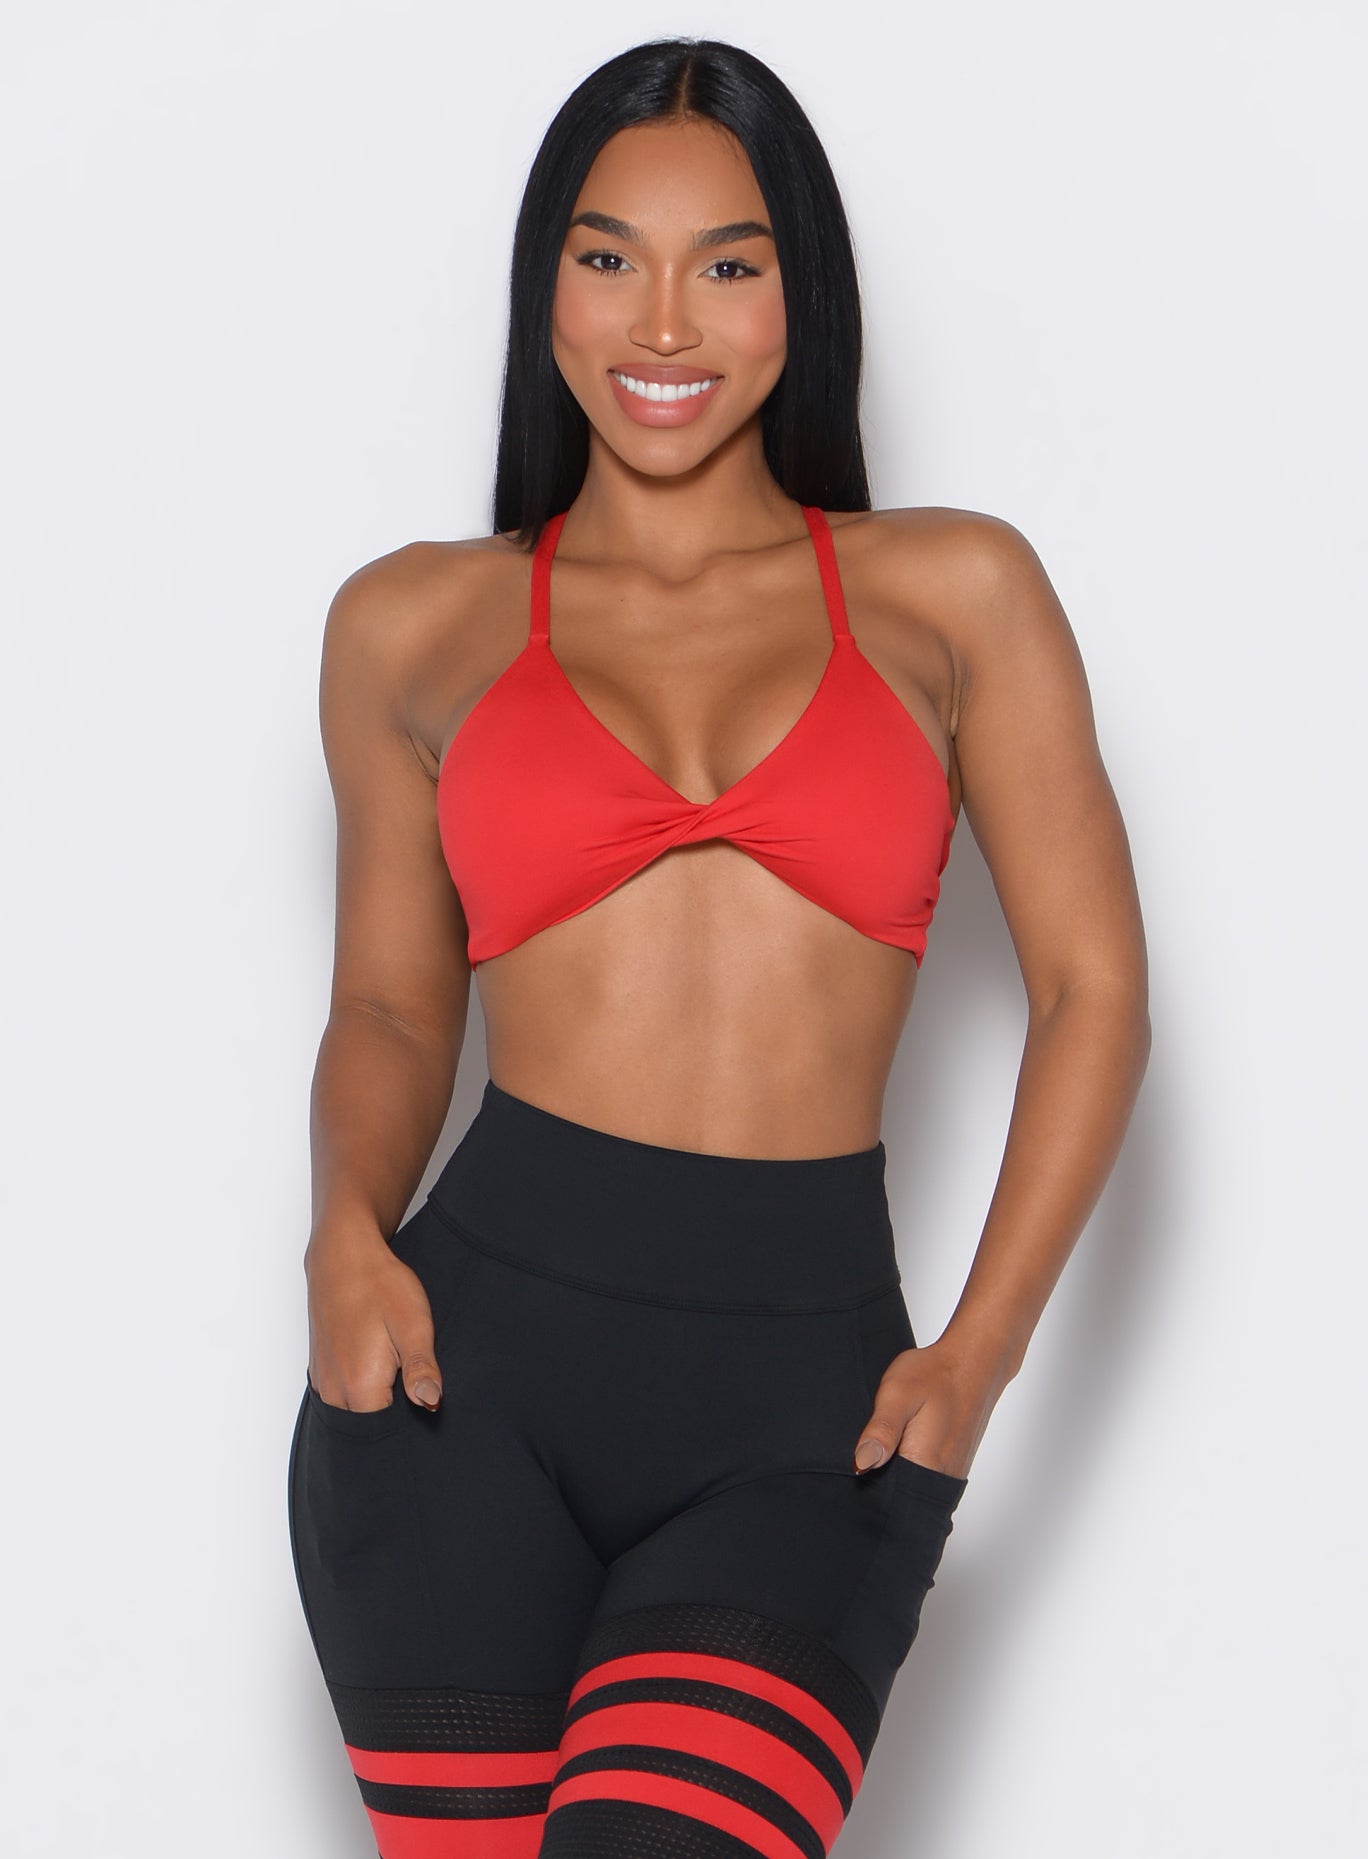 Front profile picture of a model wearing the Twist Mini Bra in Fire color complemented by a matching thigh high